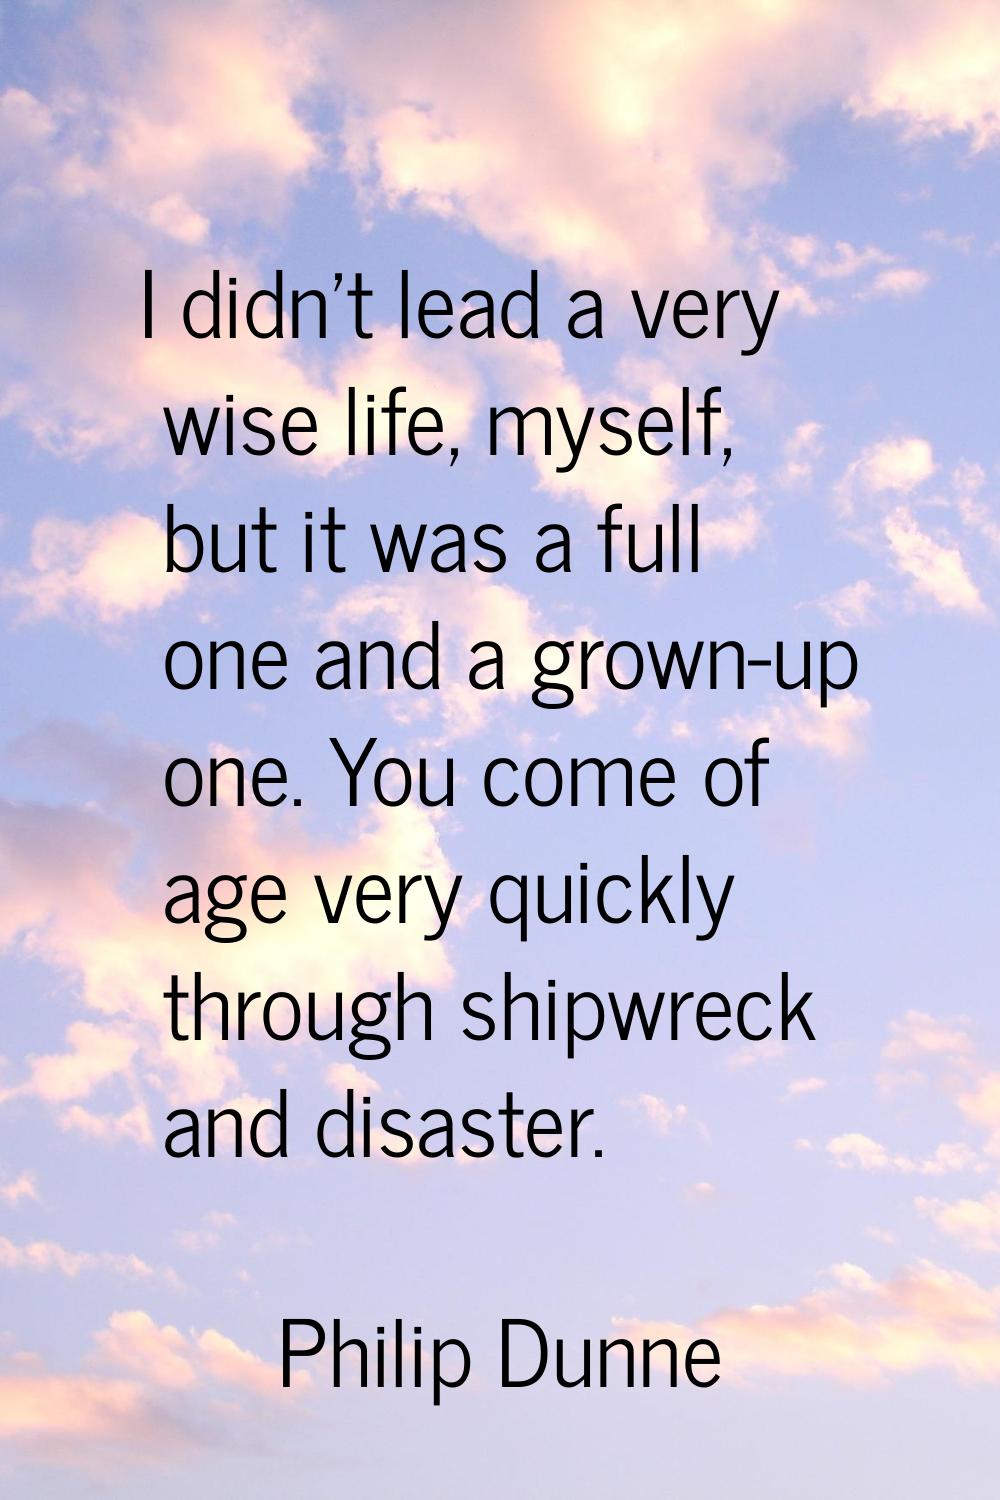 I didn't lead a very wise life, myself, but it was a full one and a grown-up one. You come of age v